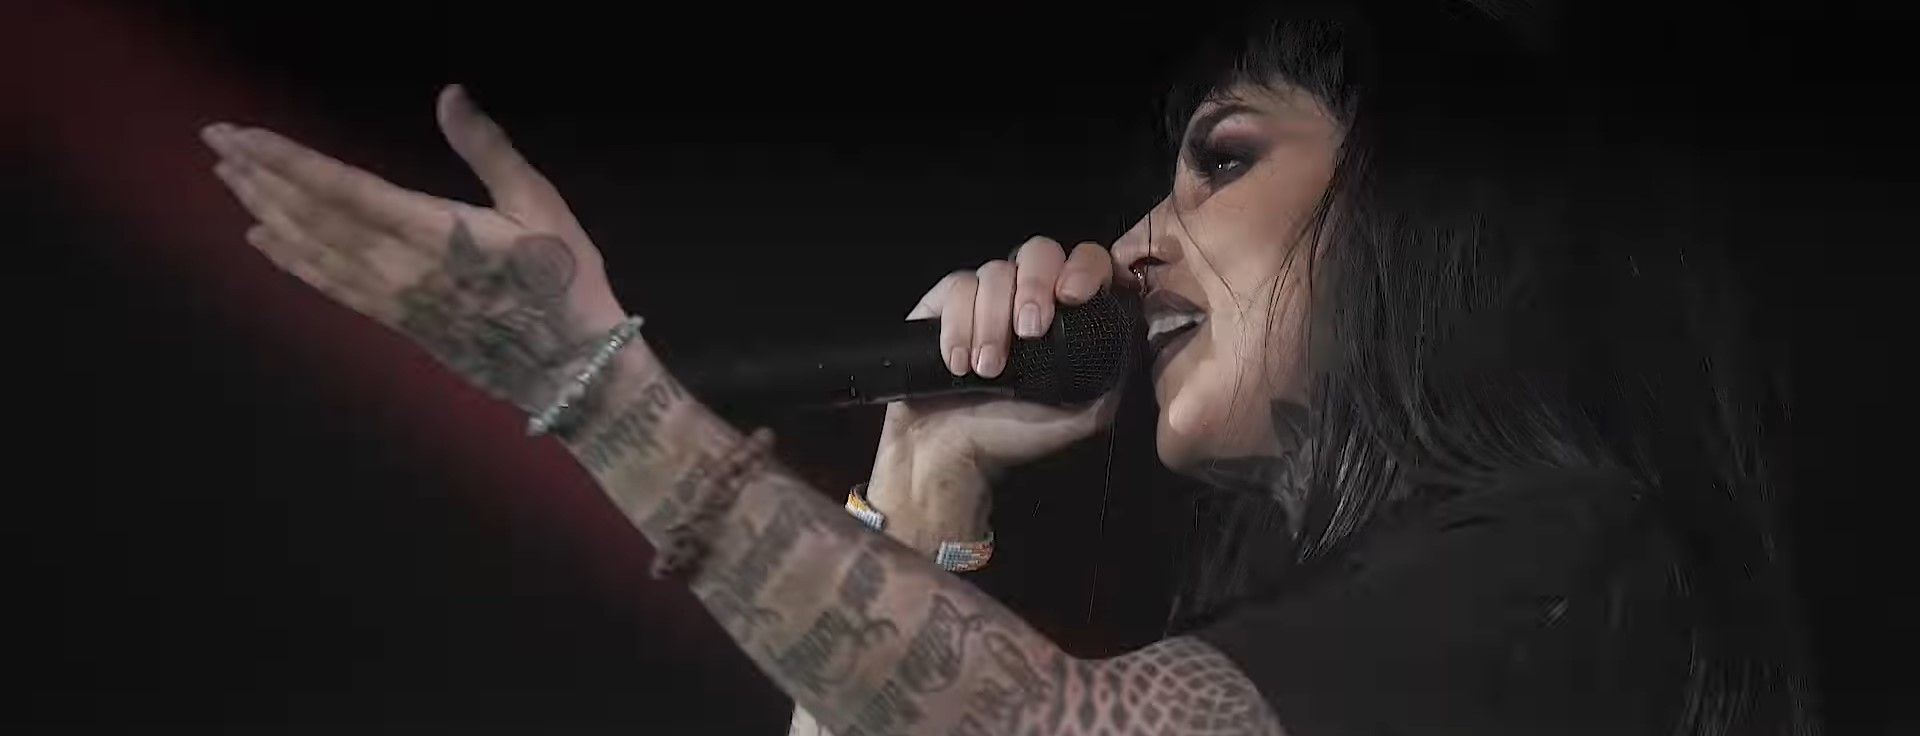 Jinjer - Pit Of Consciousness (Live In Kiev 2019)